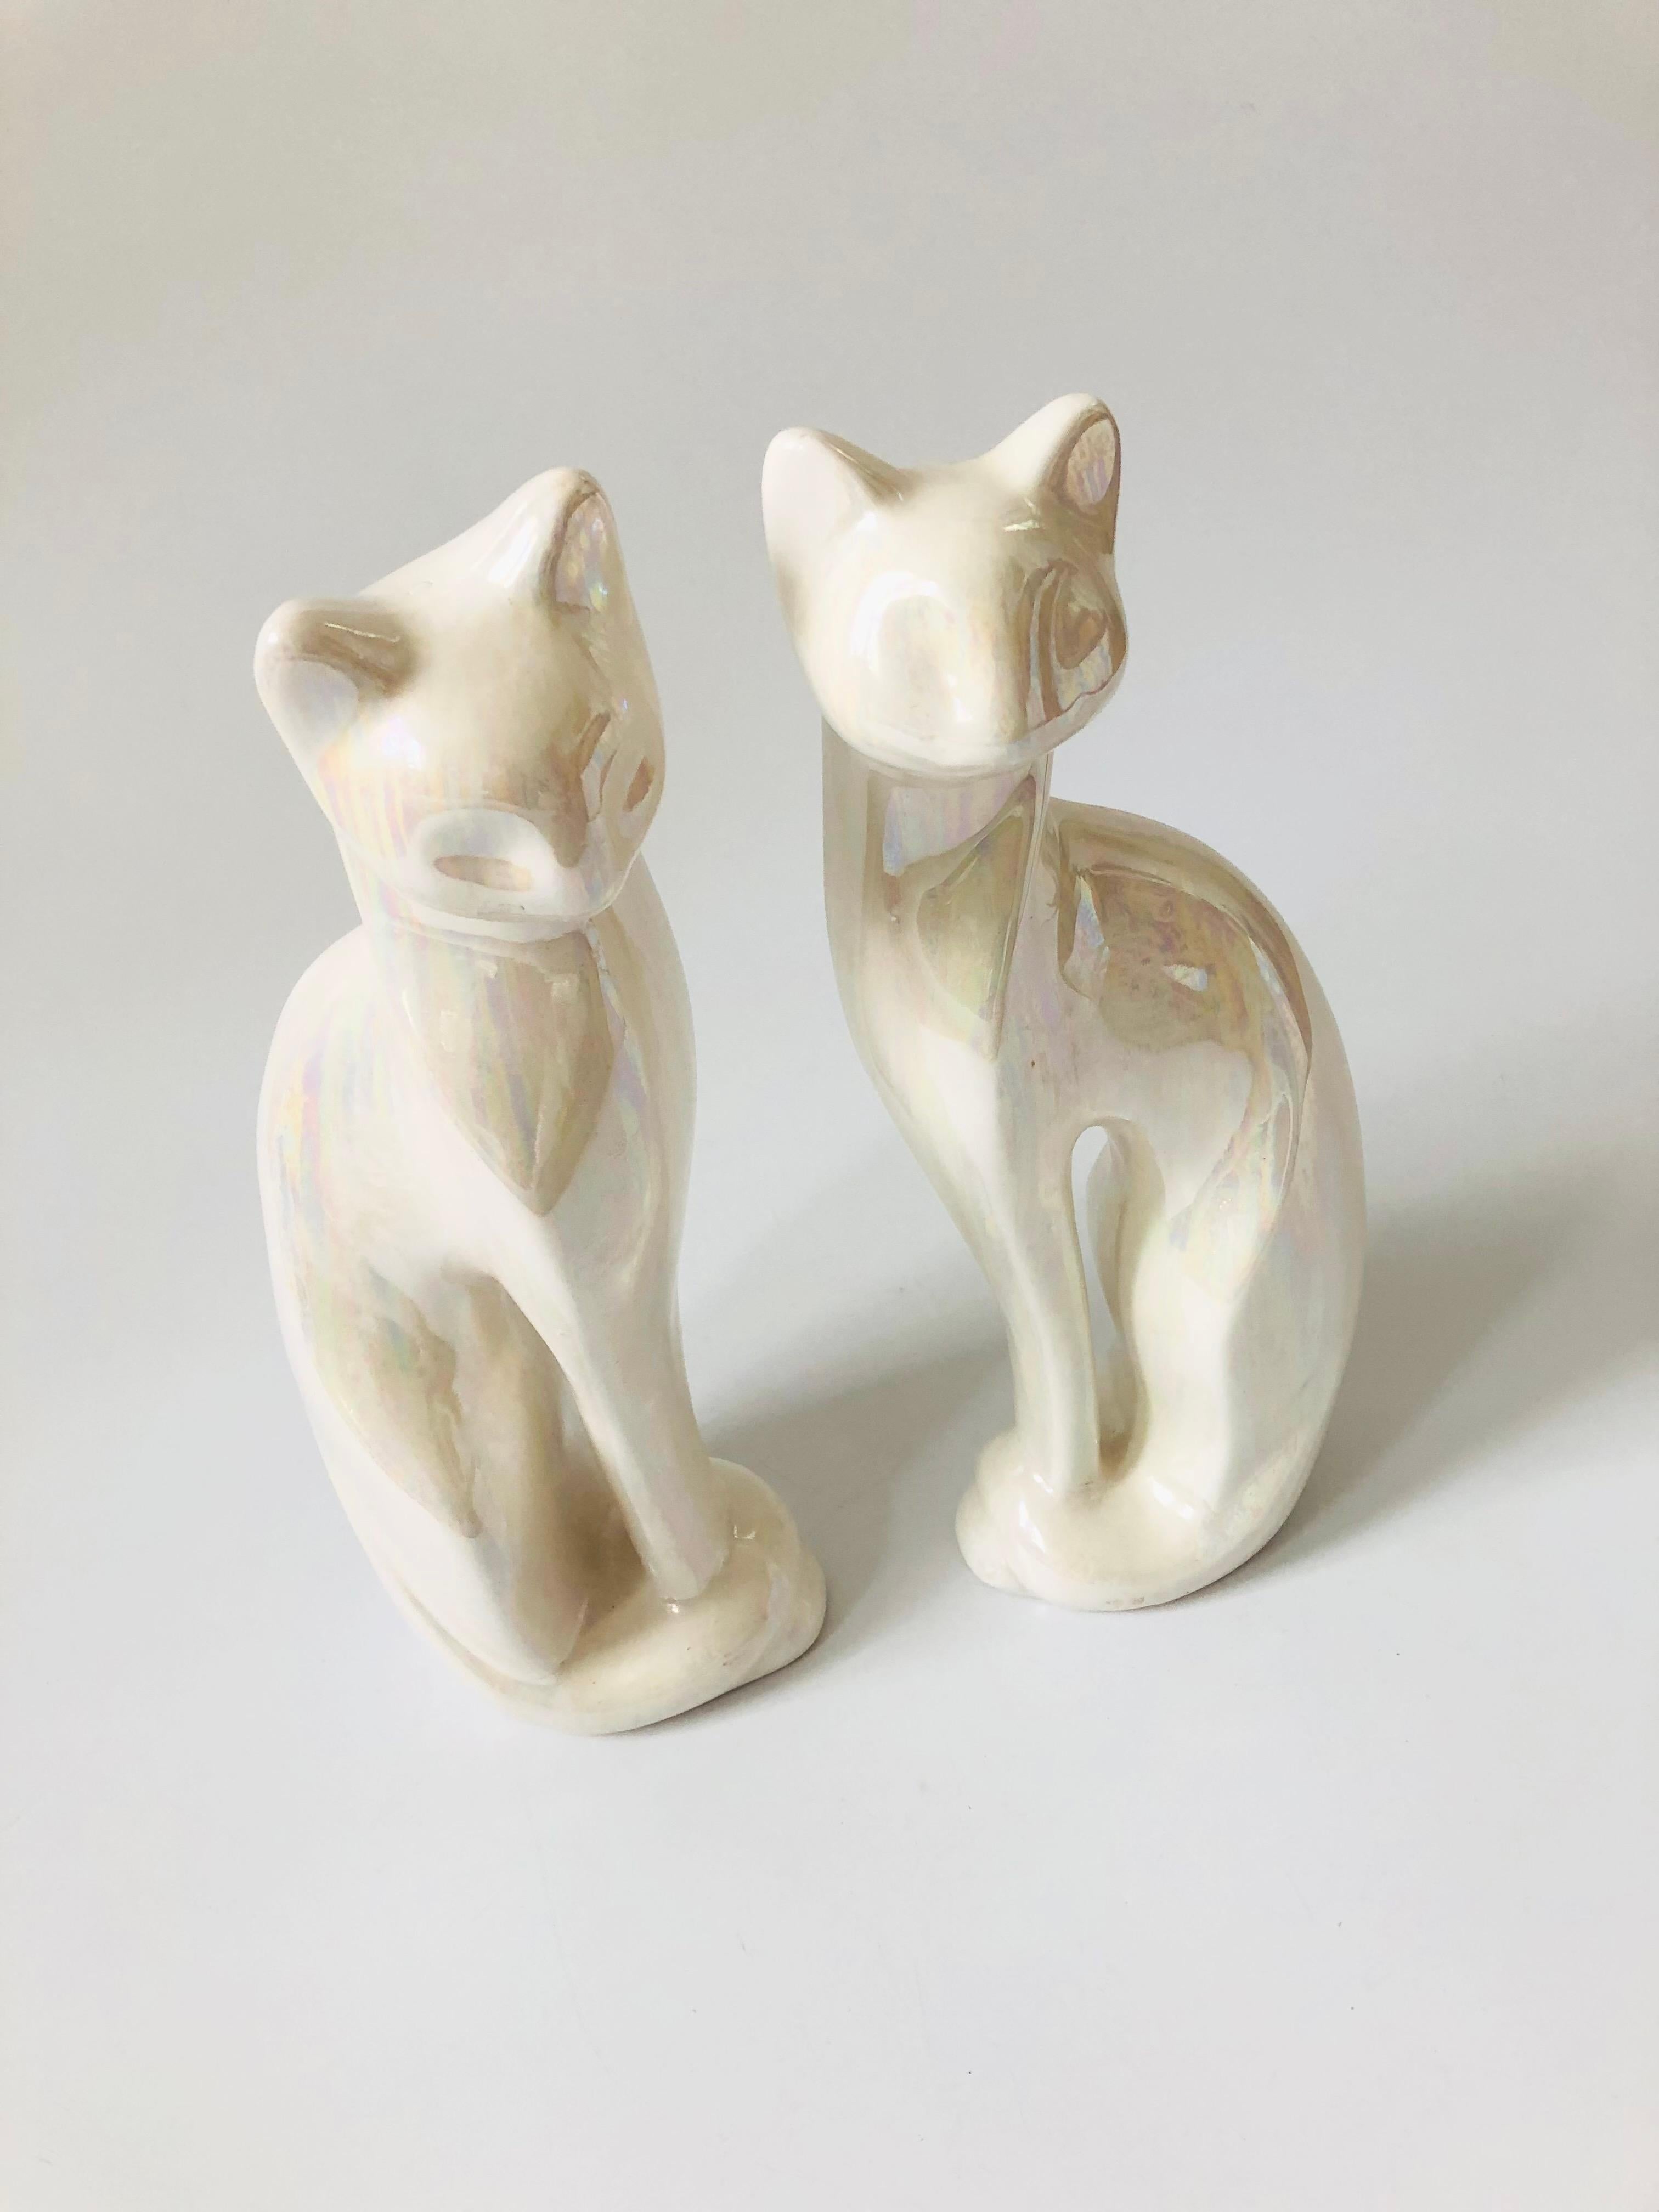 A pair of mid century ceramic cat sculptures, each finished in a glossy white iridescent glaze. Elegant pieces with great simplified stylized details to each cat's features. Please note, the cats are about the same size but not perfectly